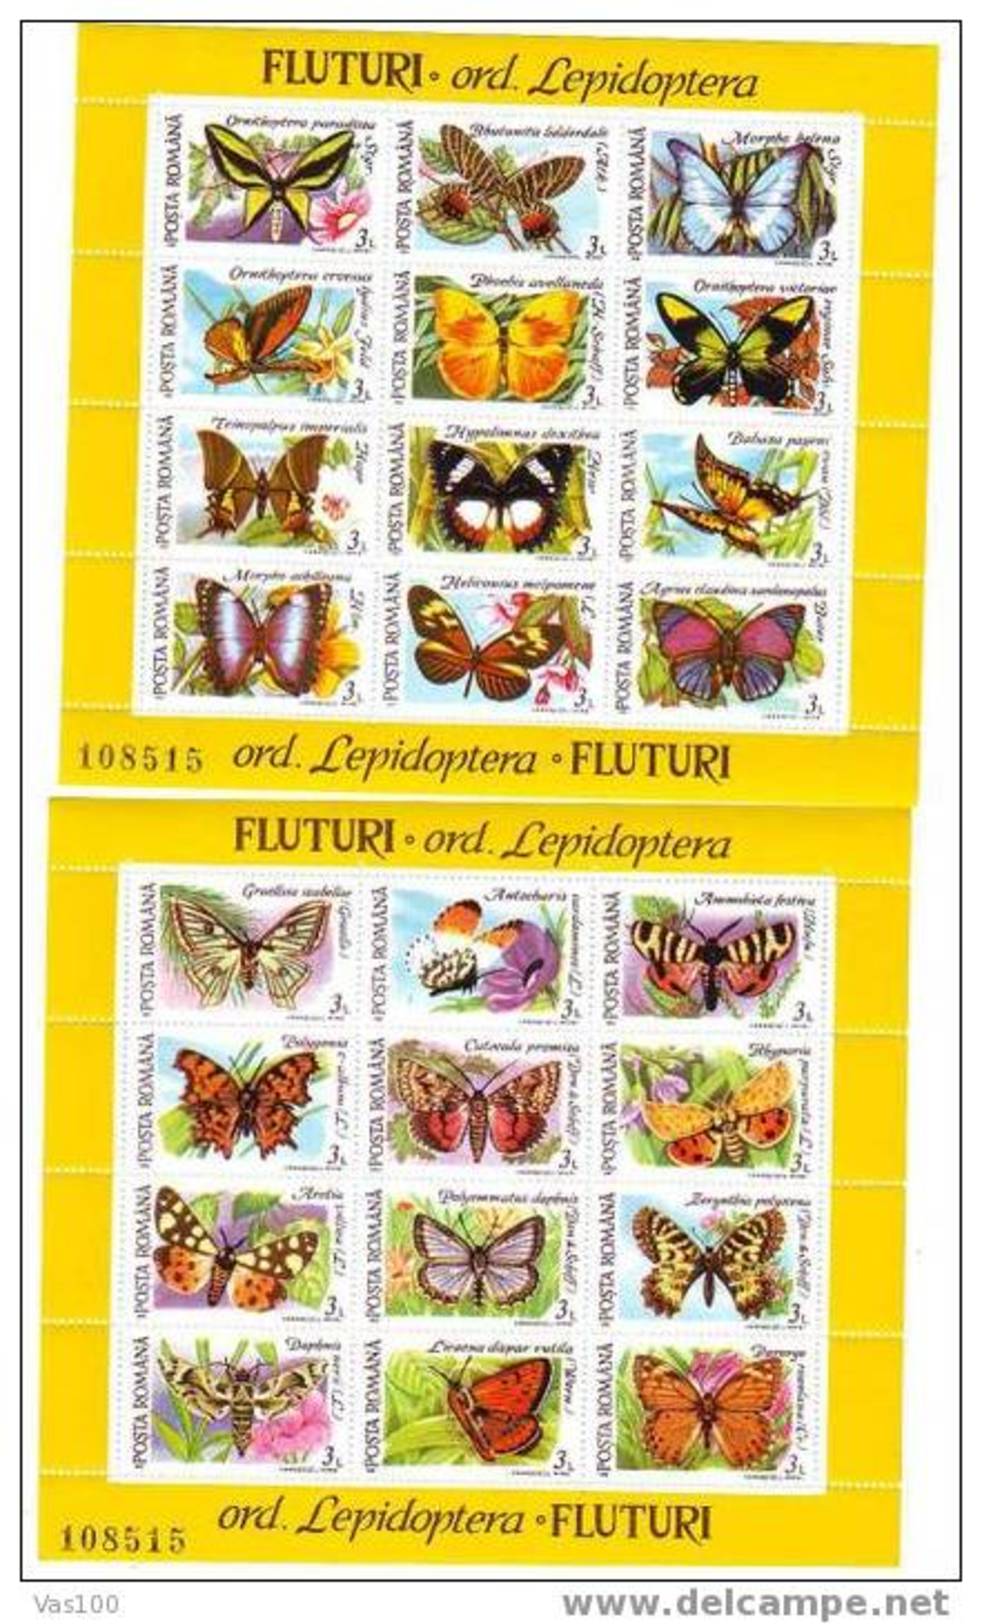 ROMANIA 1991 PAPILLONS/BUTTERFLYS,MNH,MI 267-268,2X SS,24 STAMPS - Full Sheets & Multiples